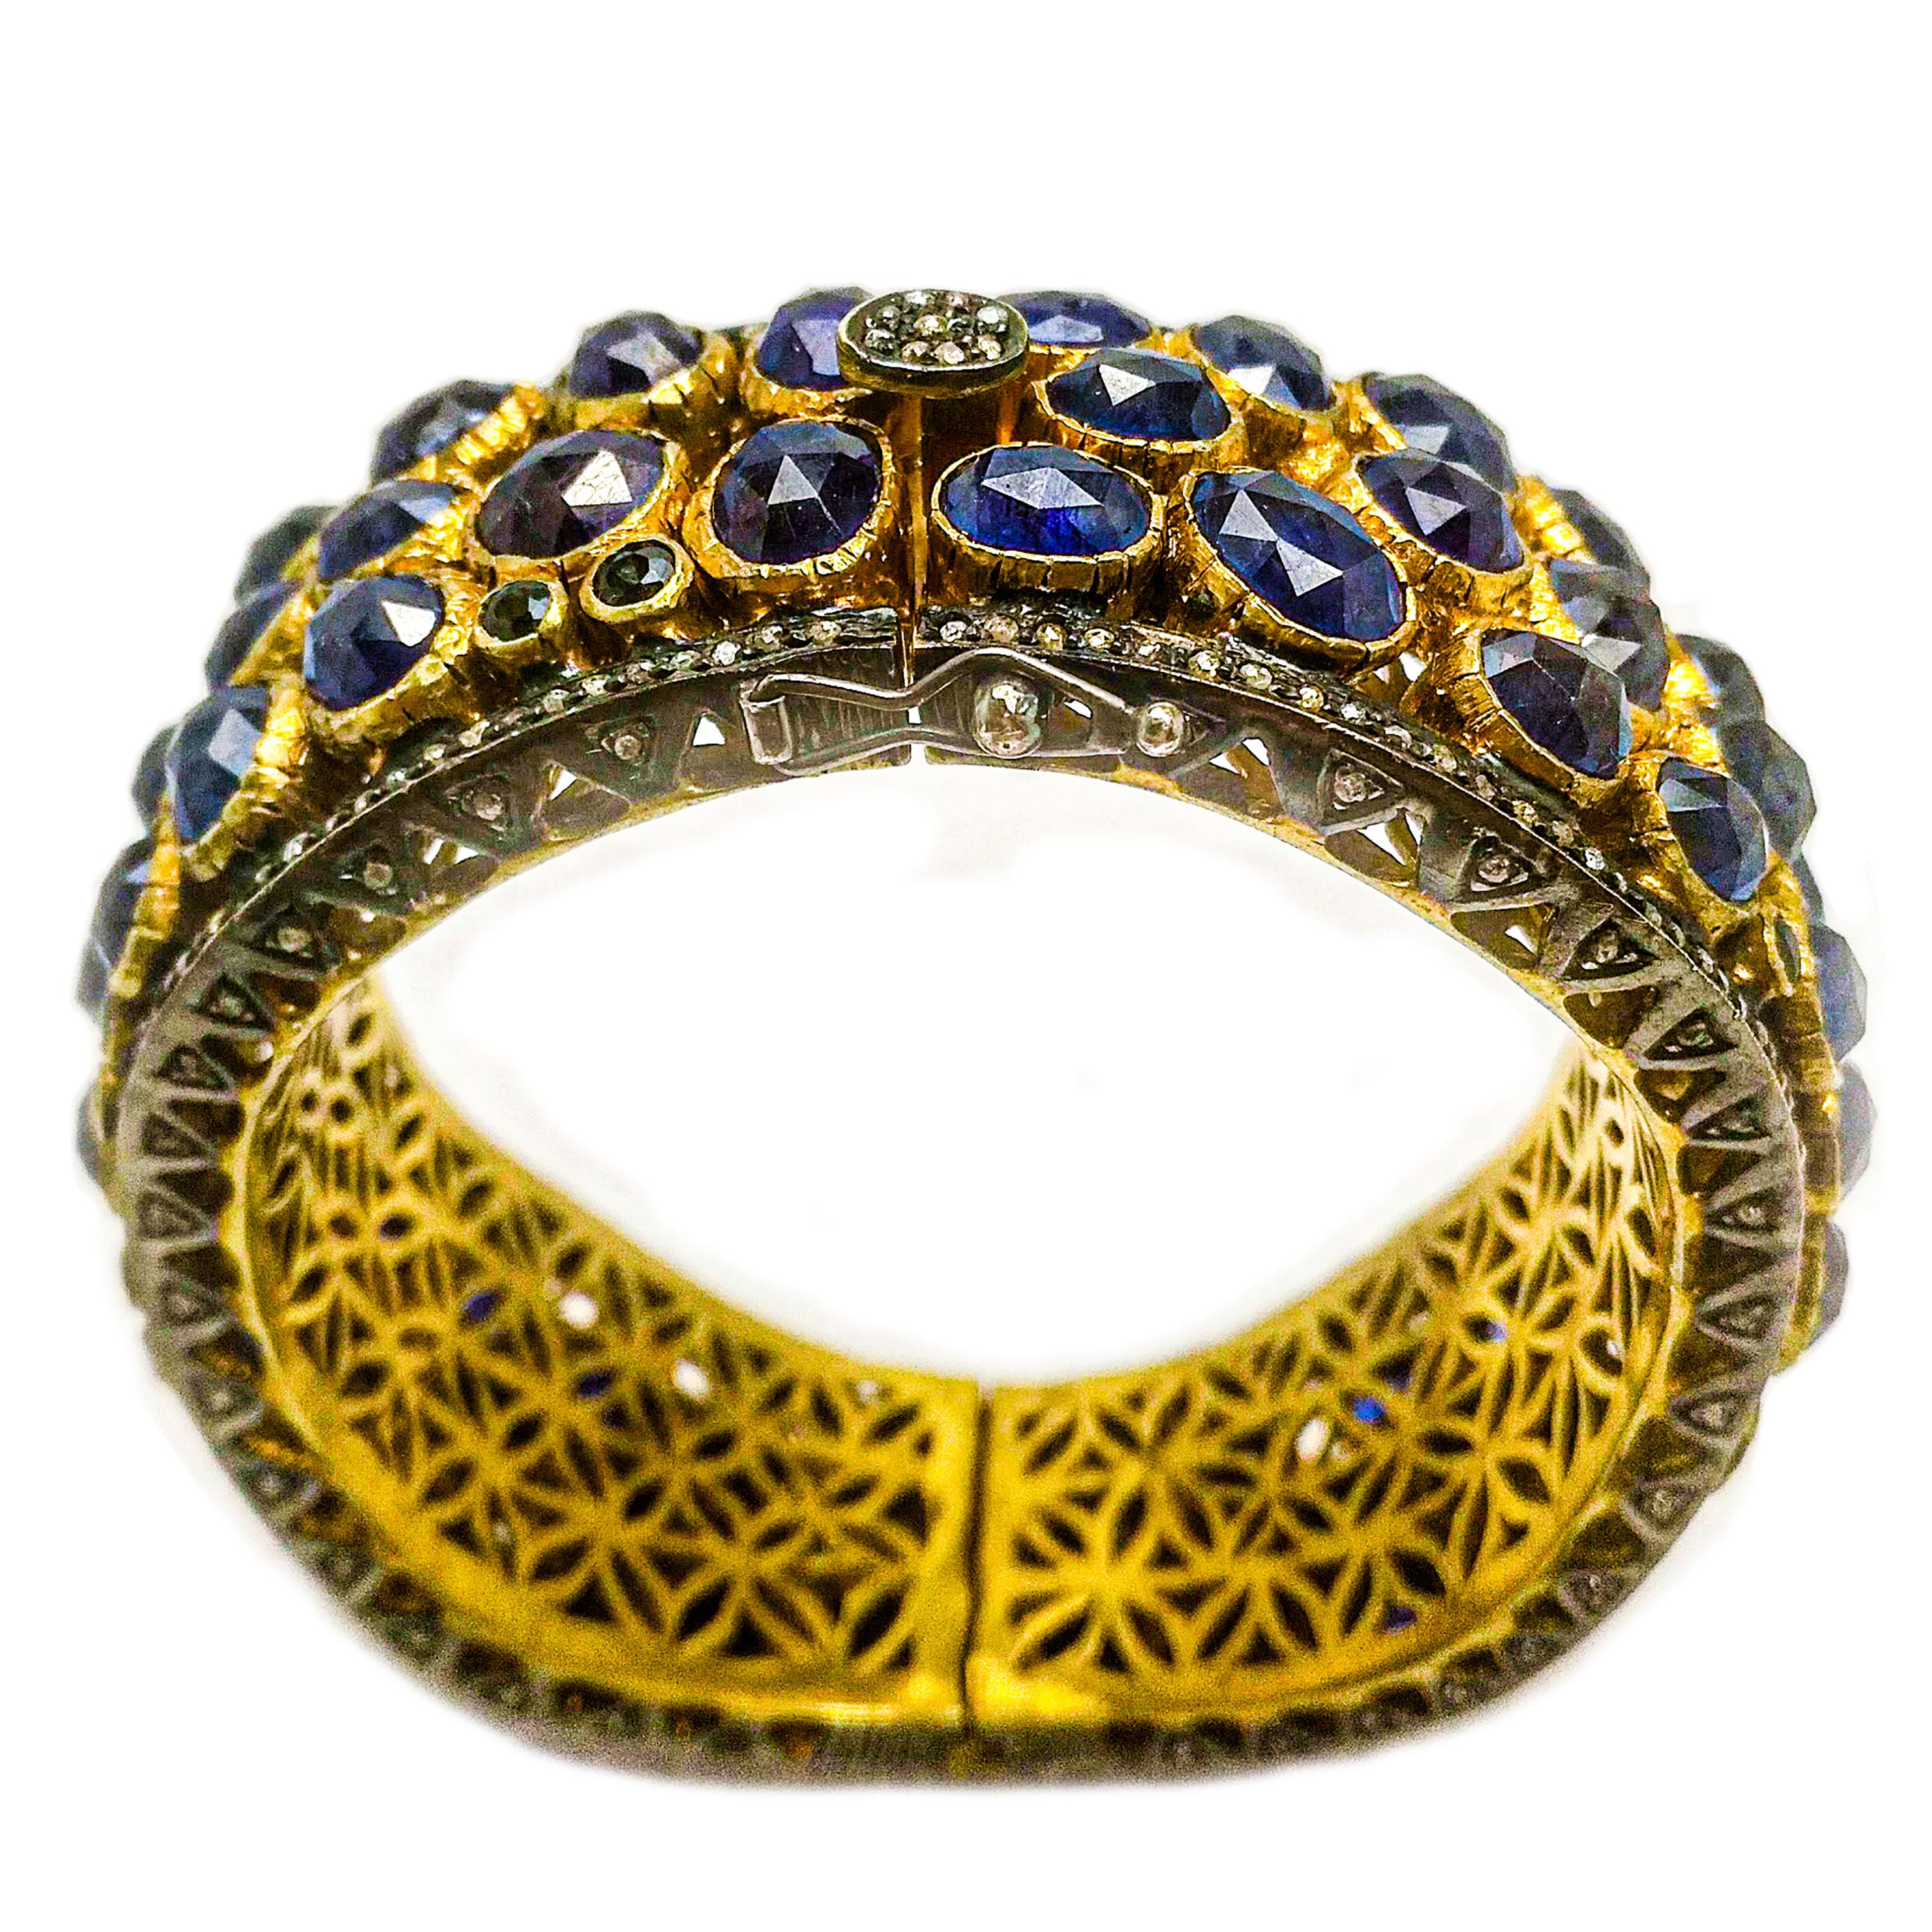 Maharaja inspired sapphire diamond bangle. Handcrafted, deep royal blue, 70 carats oval, fancy rose cut, natural sapphires mounted in bezel setting, accented with fancy tabular cut diamonds in micro pave setting with oxidized wavy bangle border.